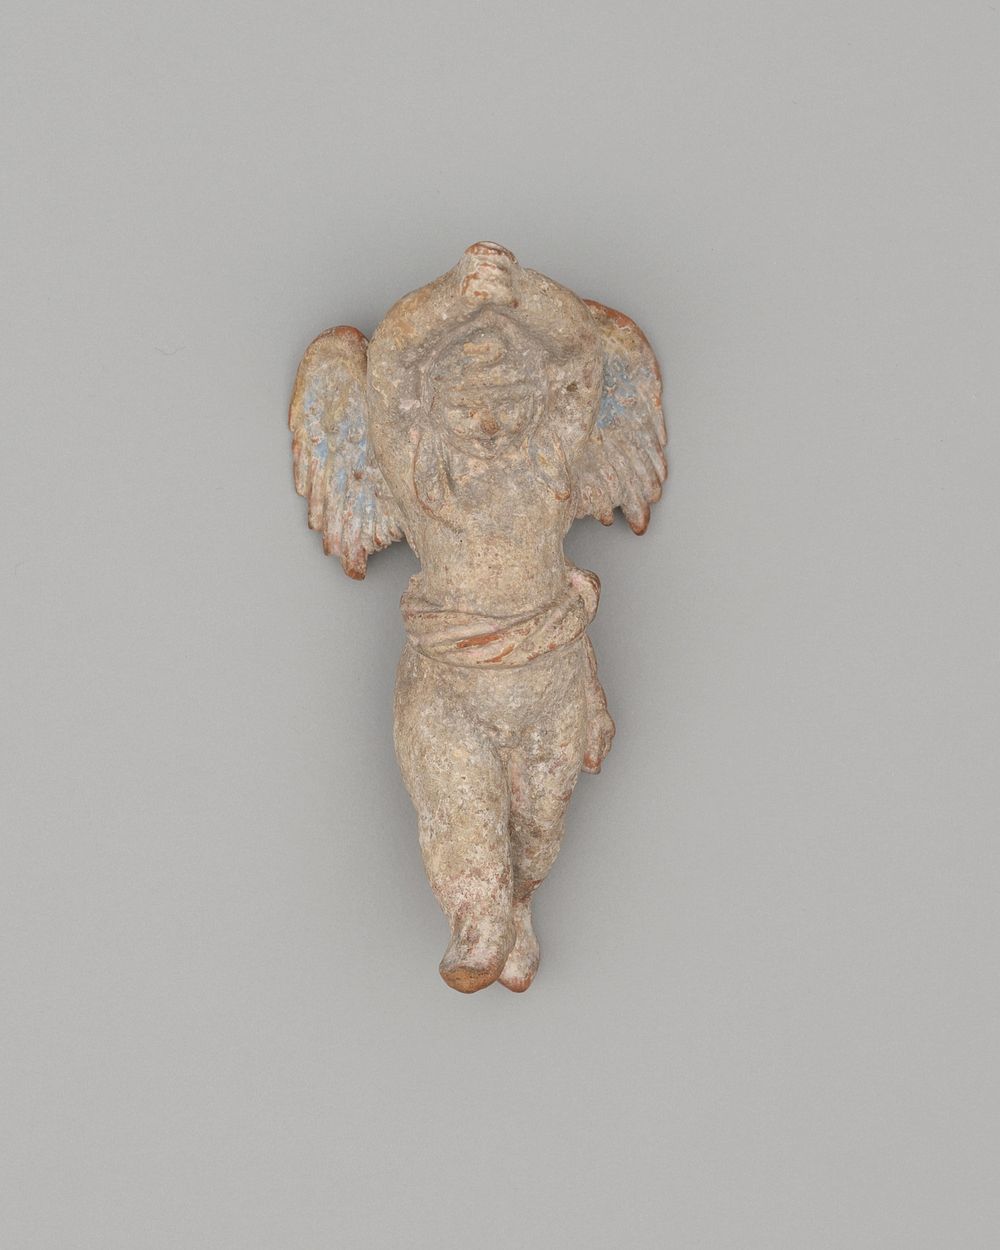 Statuette of Eros by Ancient Greek